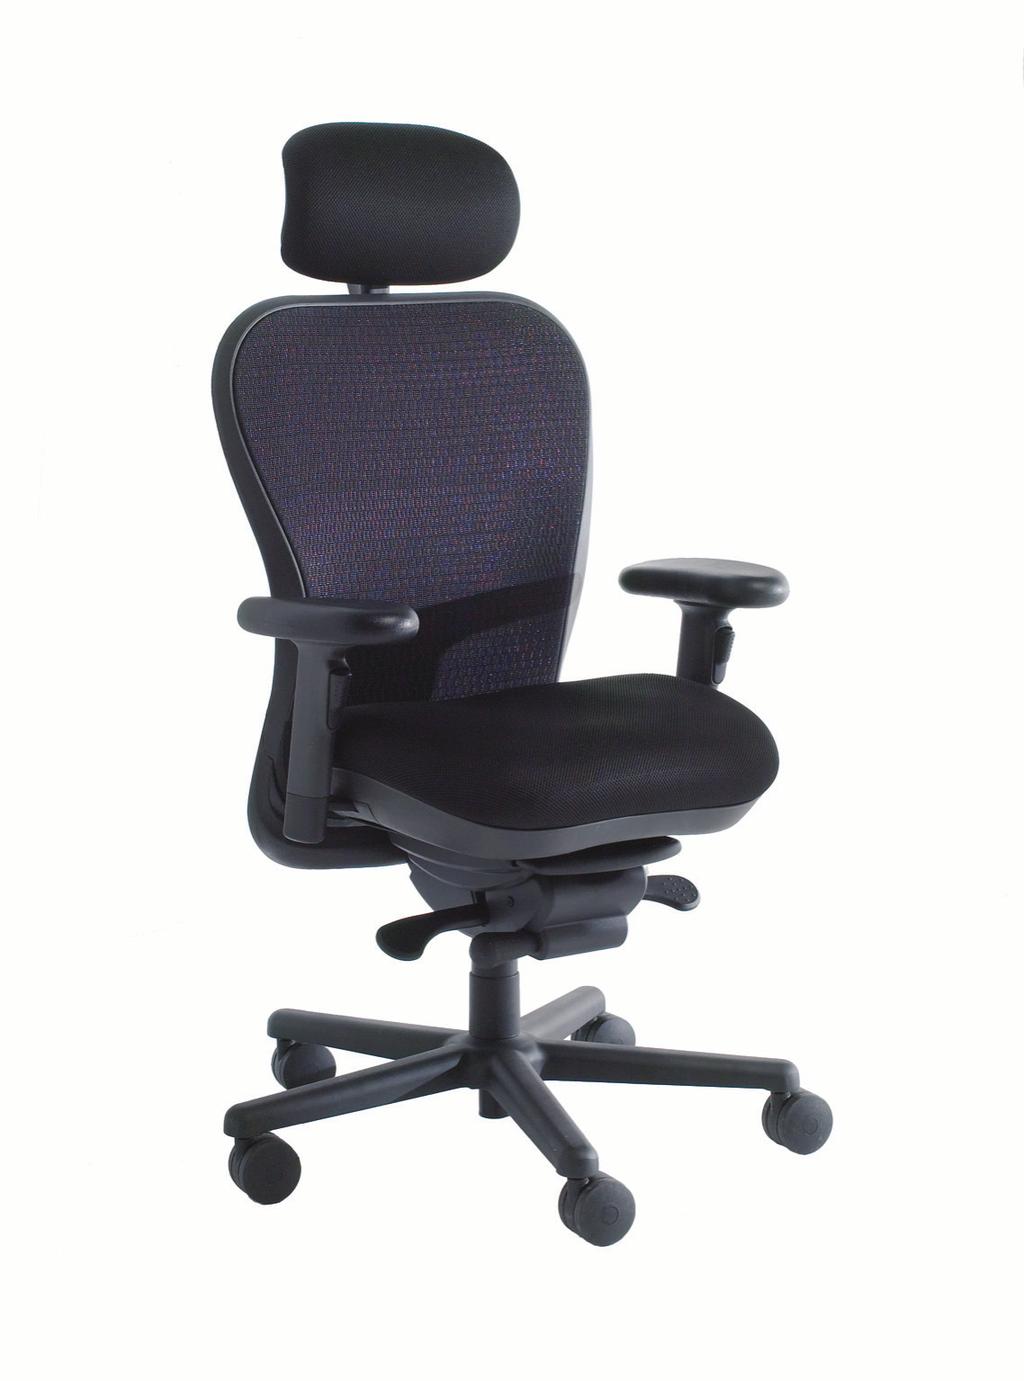 CXO HEAVY DUTY CXOHDHBBLK CXOHDHBBLKNH (w/ head rest) (no head rest) Our CXOhd follows with nearly all the same features and styling of the CXO, but it s reinforced in key locations to handle weights